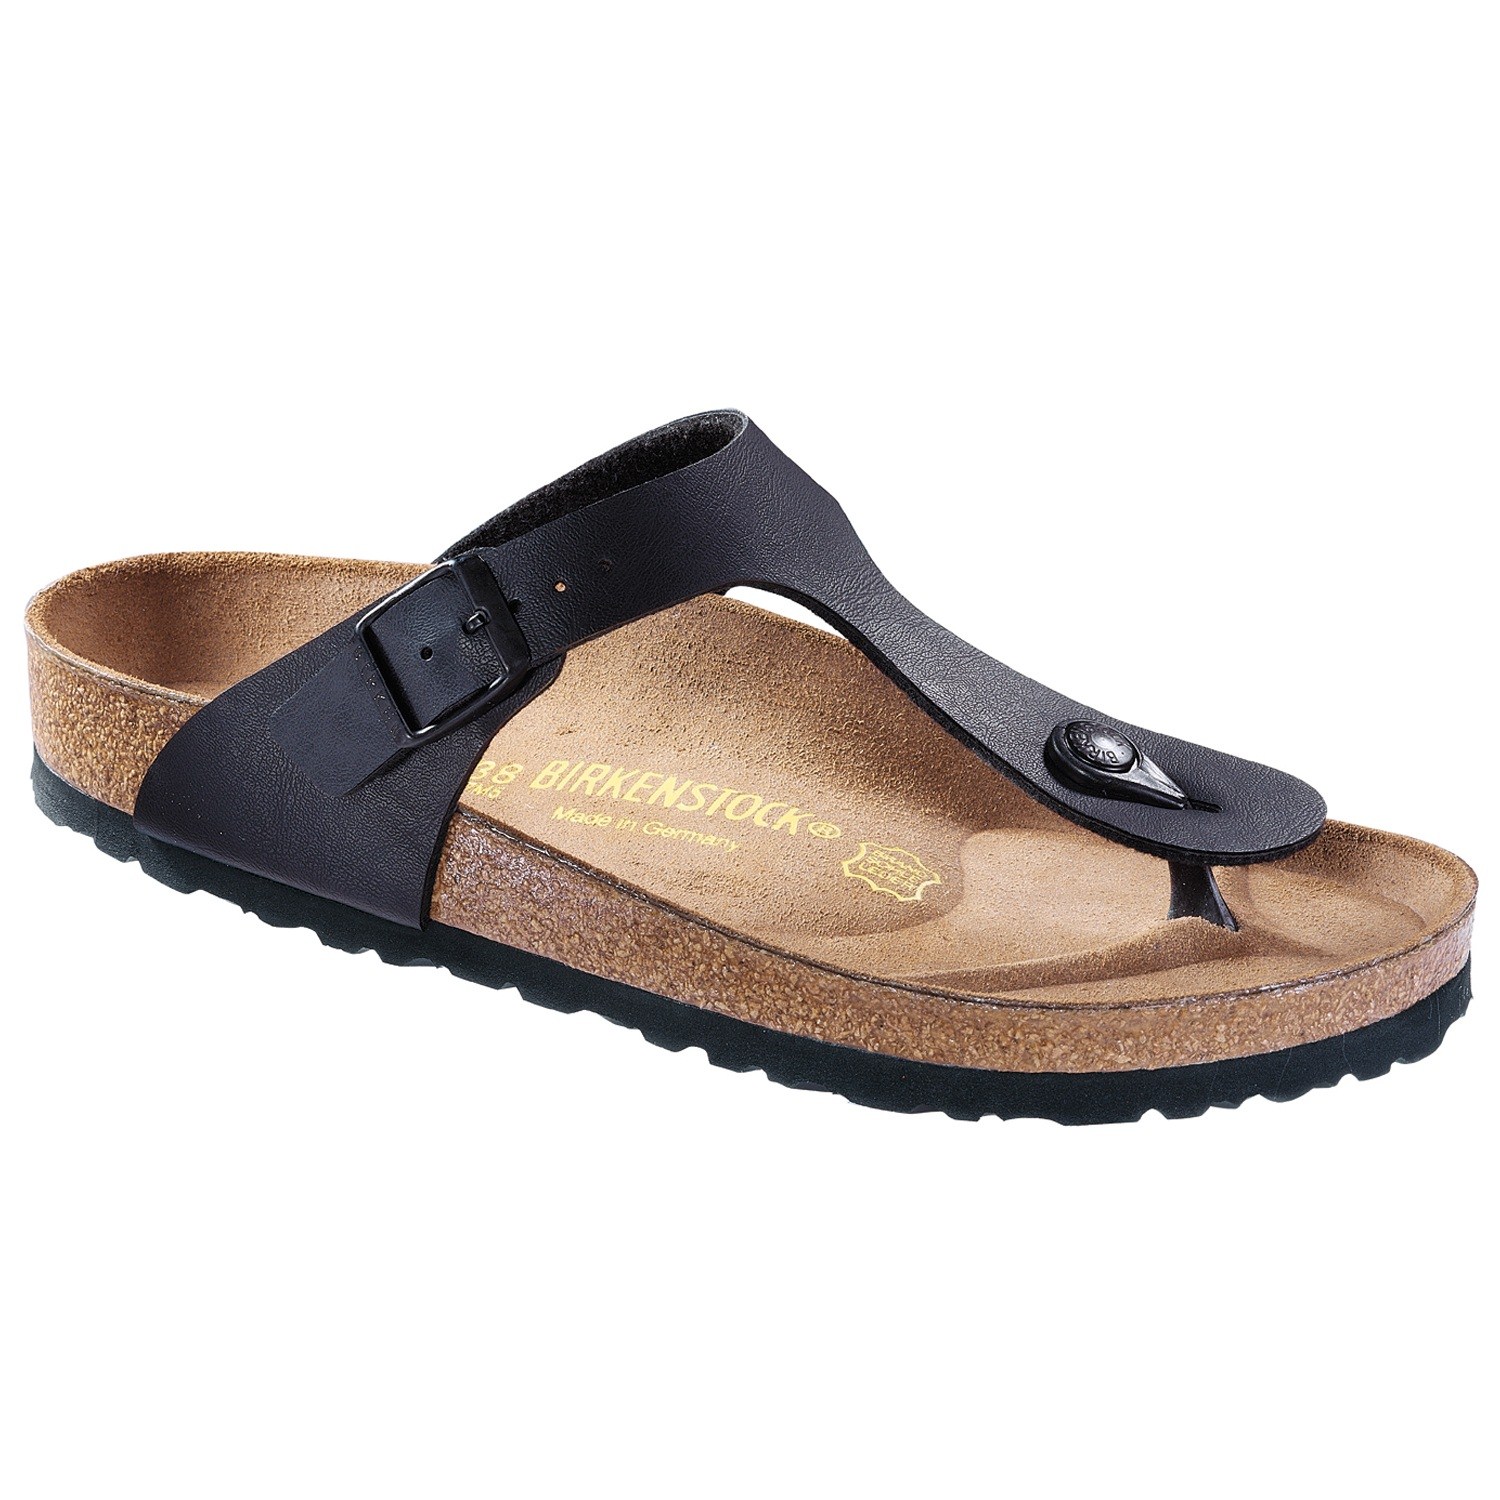 Birkenstock Gizeh Black - Everyday shoes - Shoes - Timarco